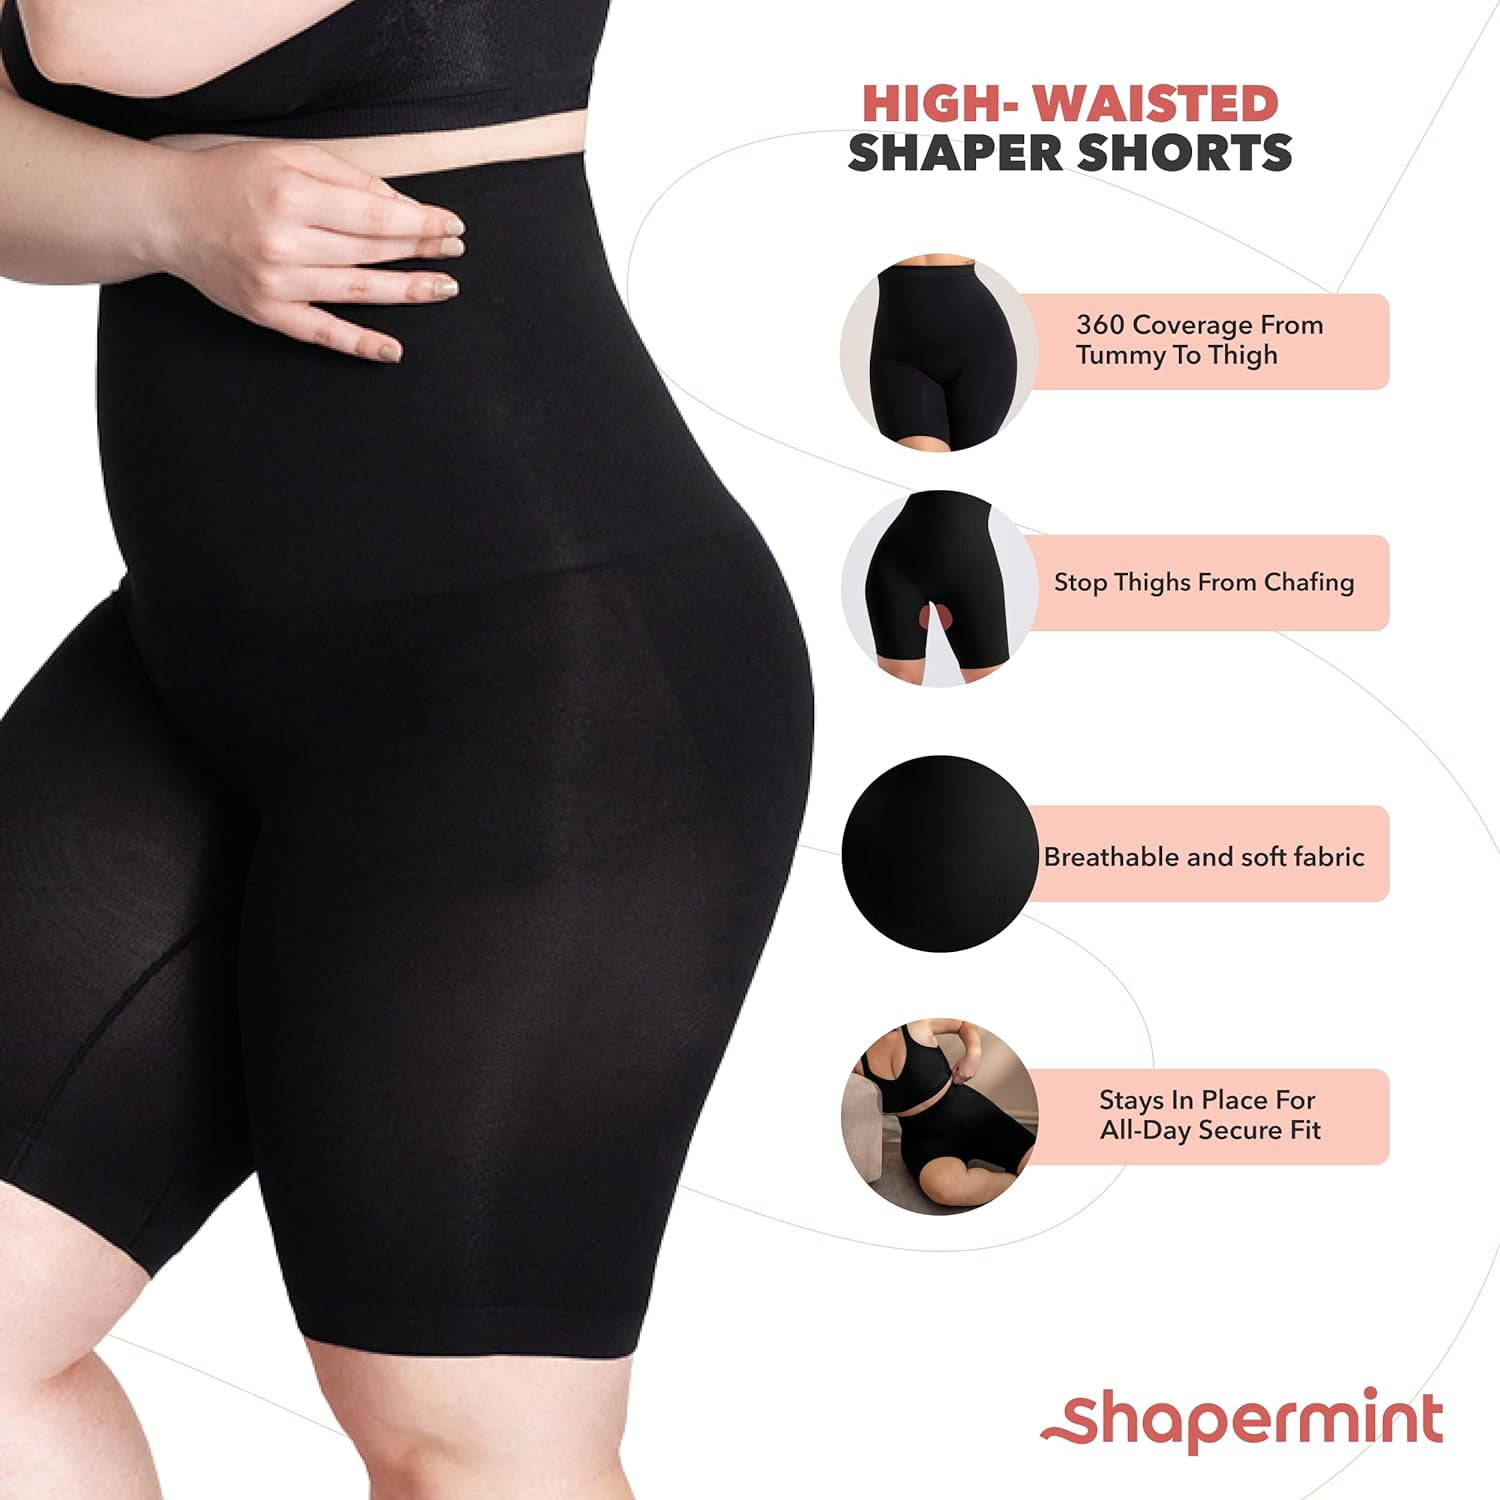 Shapermint - The easiest way to shop shapewear online: (Keep Celebrating!)→Shaper  Shorts 67% OFF + FREE Gift!